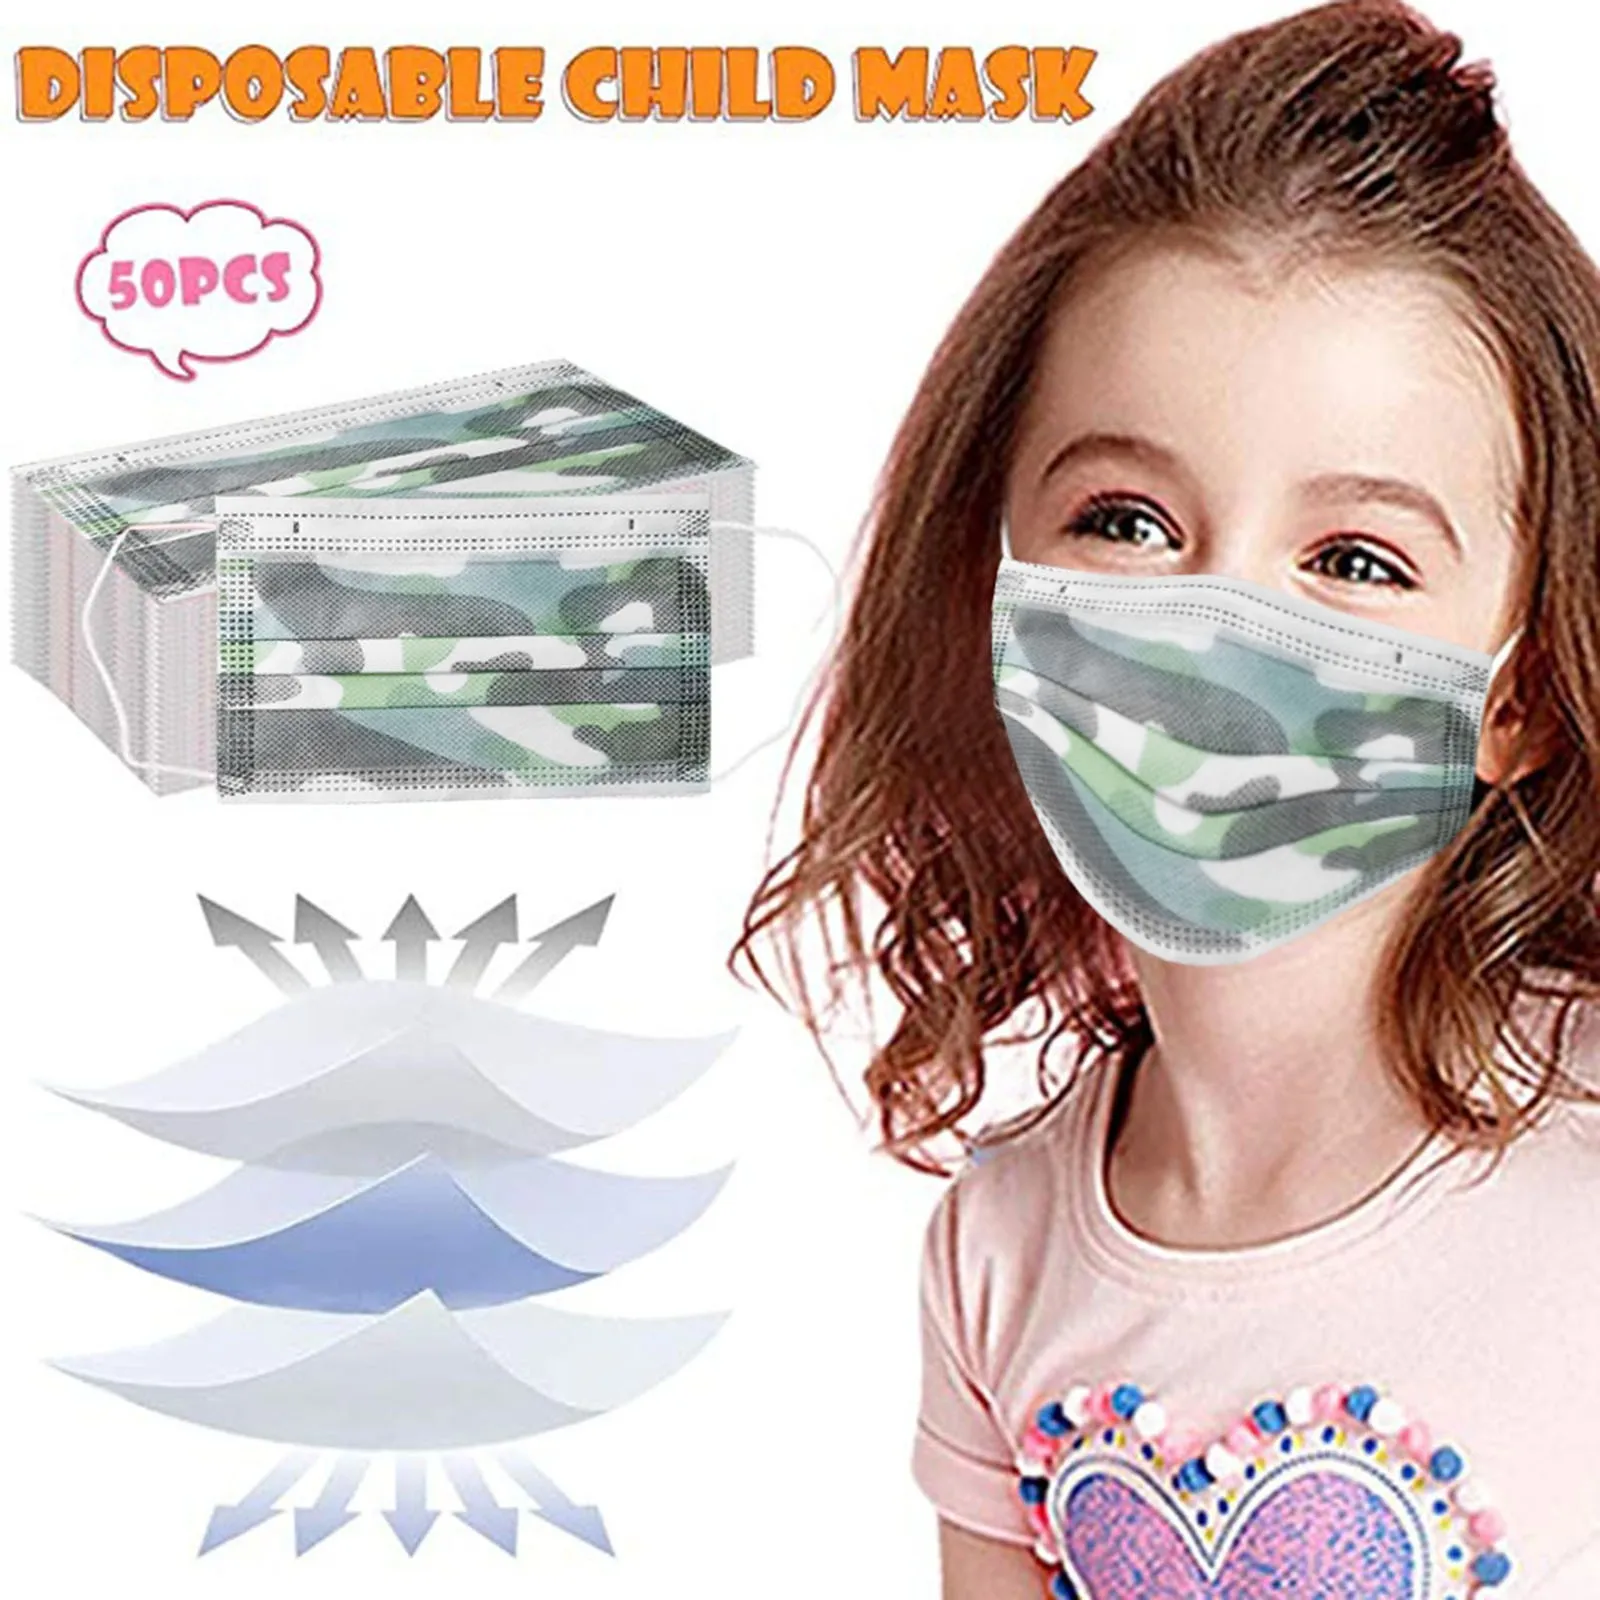 

50PCS Kids Child Disposable Cartoon Mouth Mask 3 Layer Breathable Children's Non Wovens Mask Thick Warm Face Earloop Mask